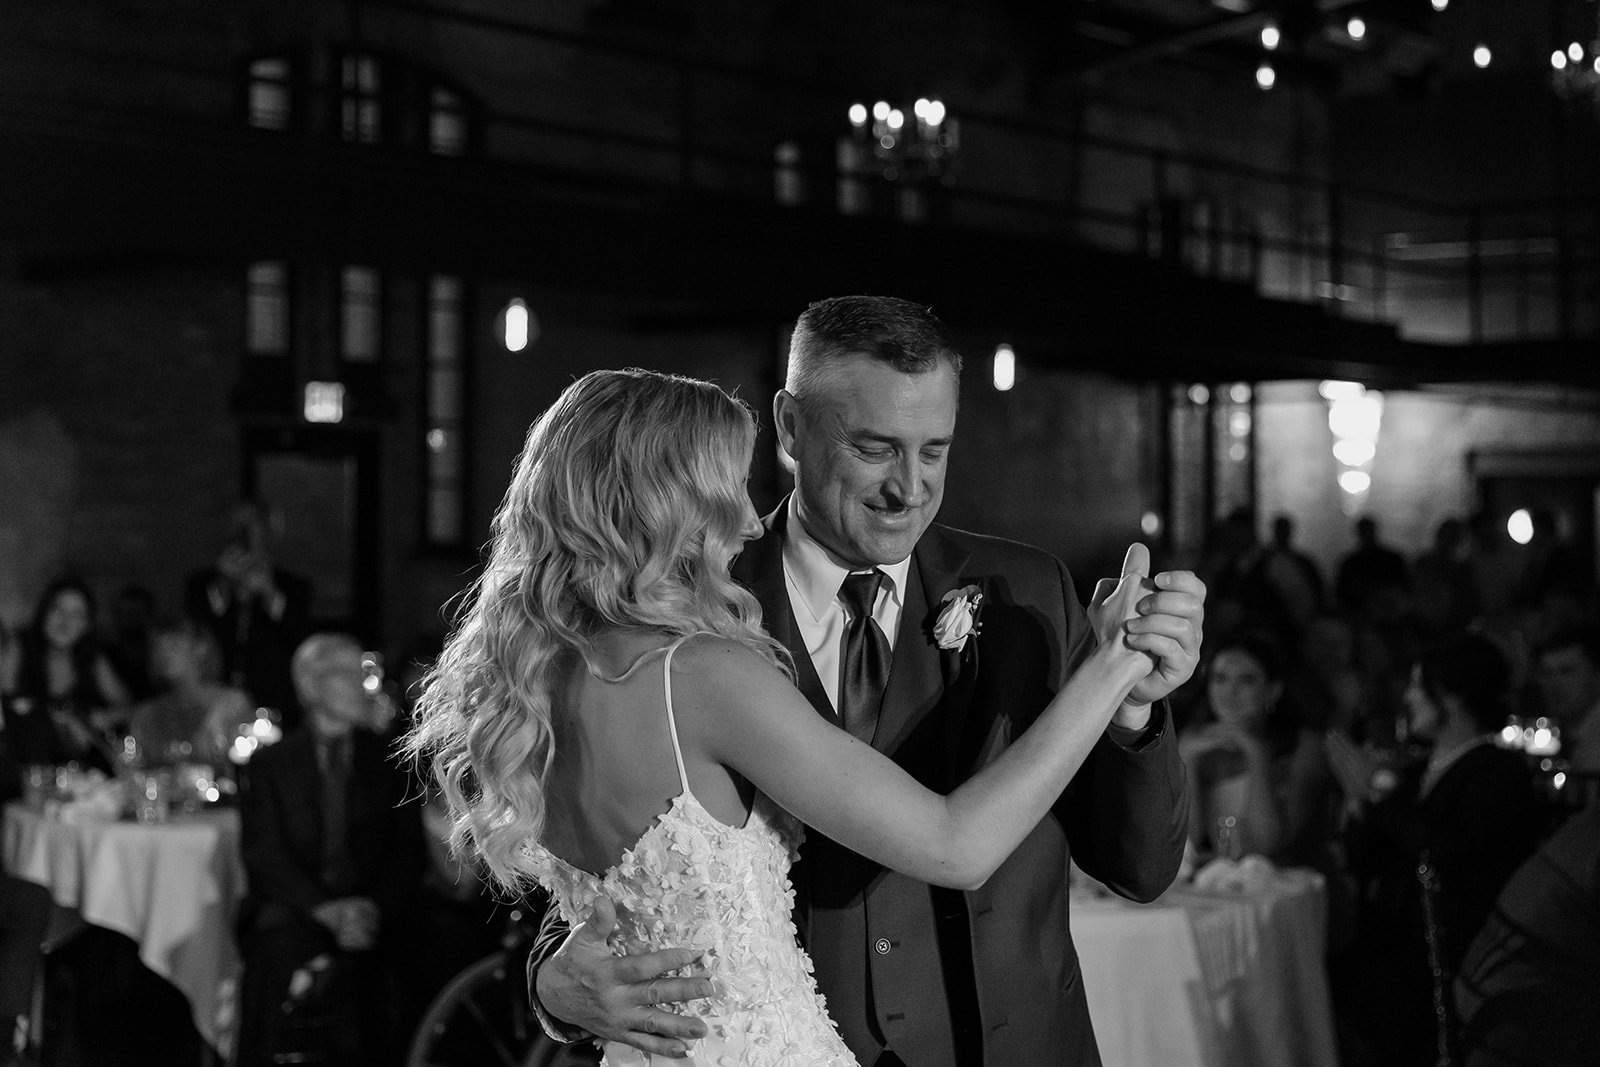 Bride dances with her new father in law.